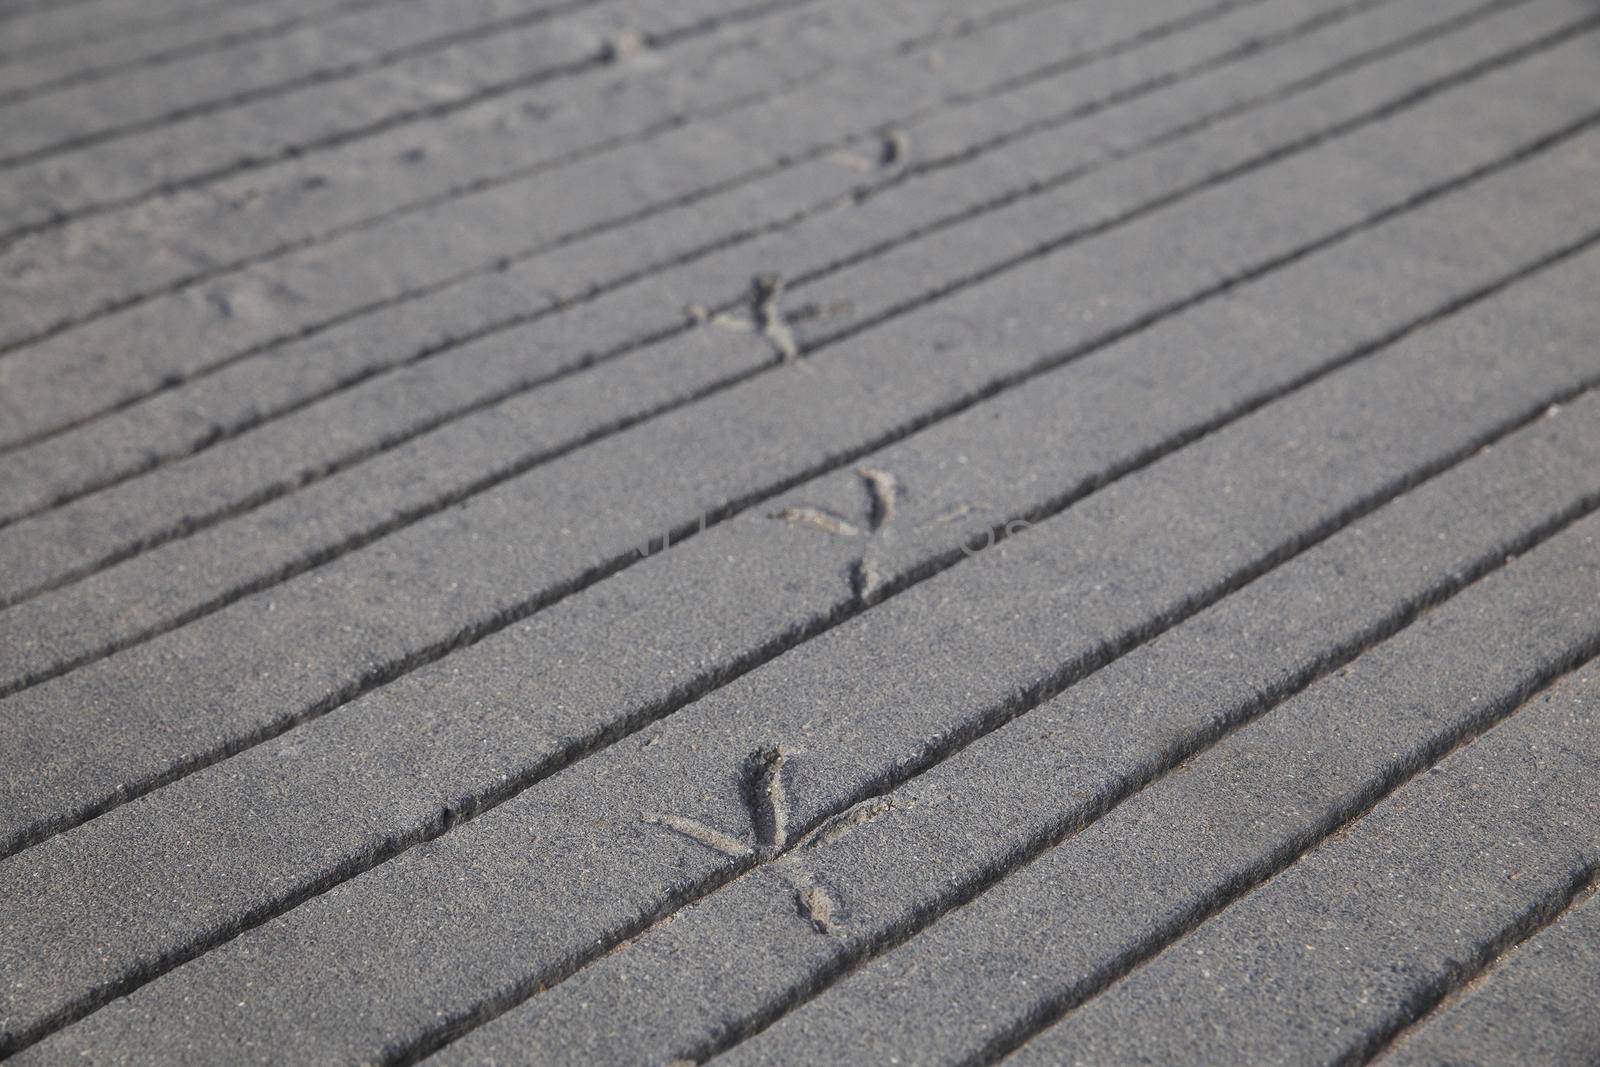 Traces of bird that walked on fresh concrete in Denmark.